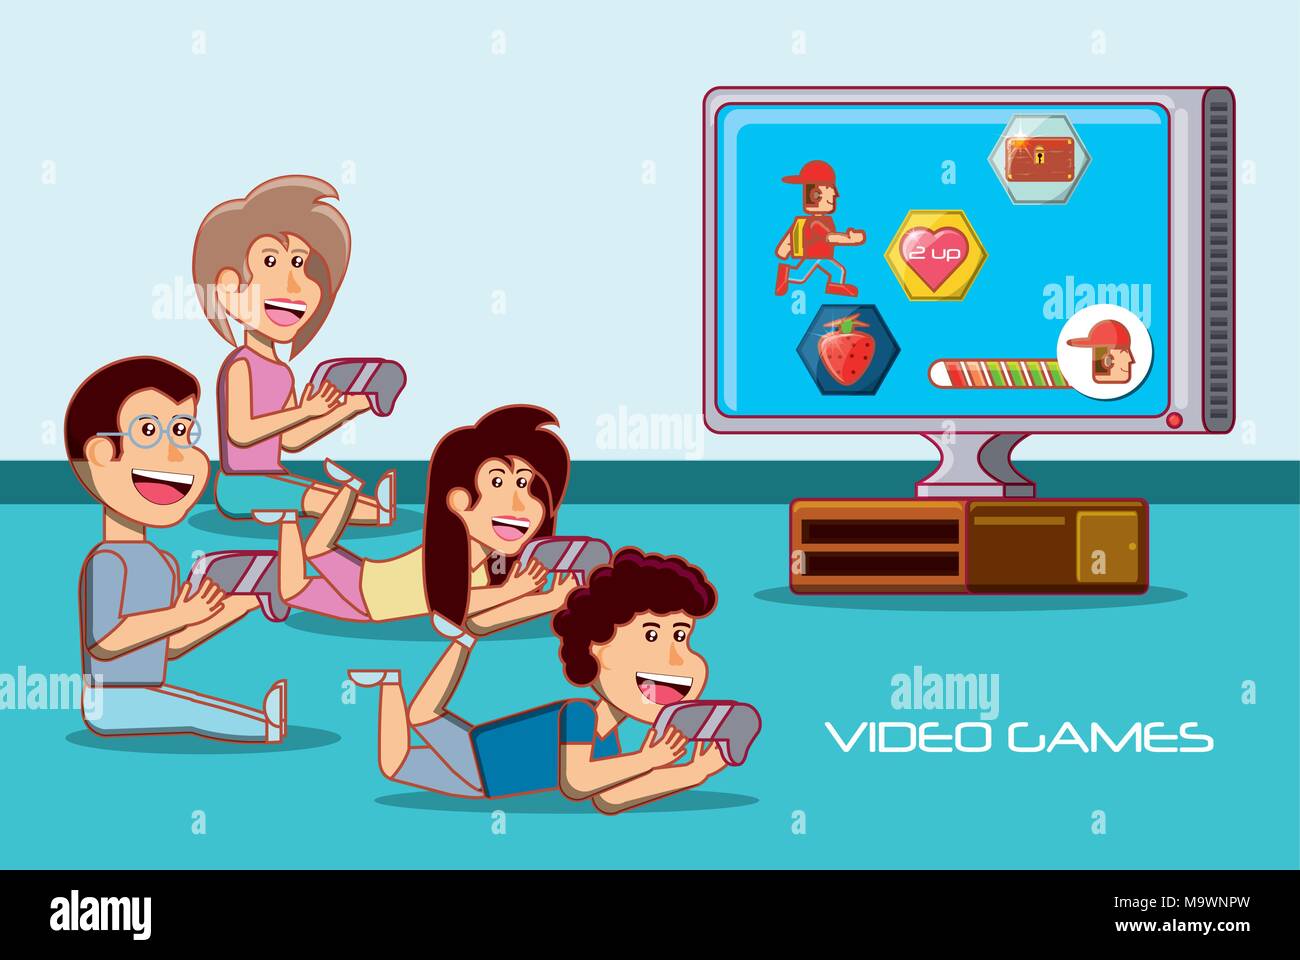 Kids Gaming Stock Vector Images - Alamy